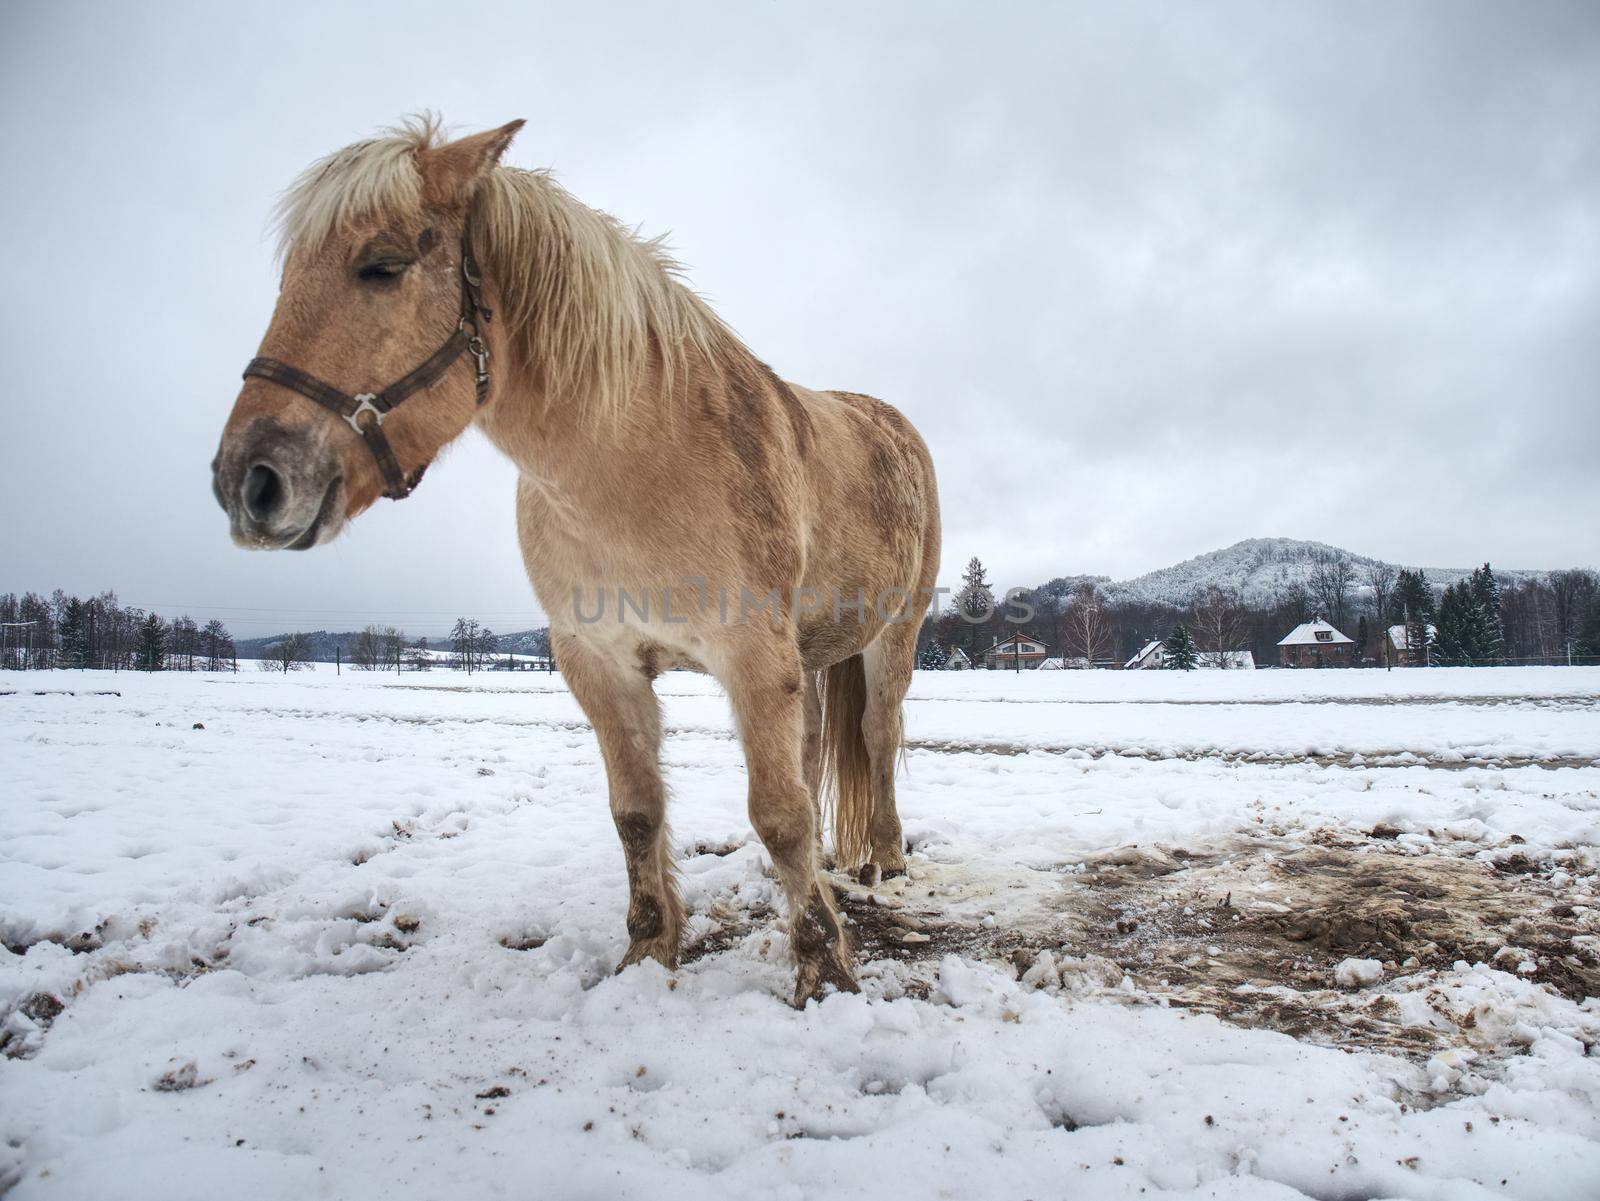 Isabella white horse in snow. Winter life by rdonar2